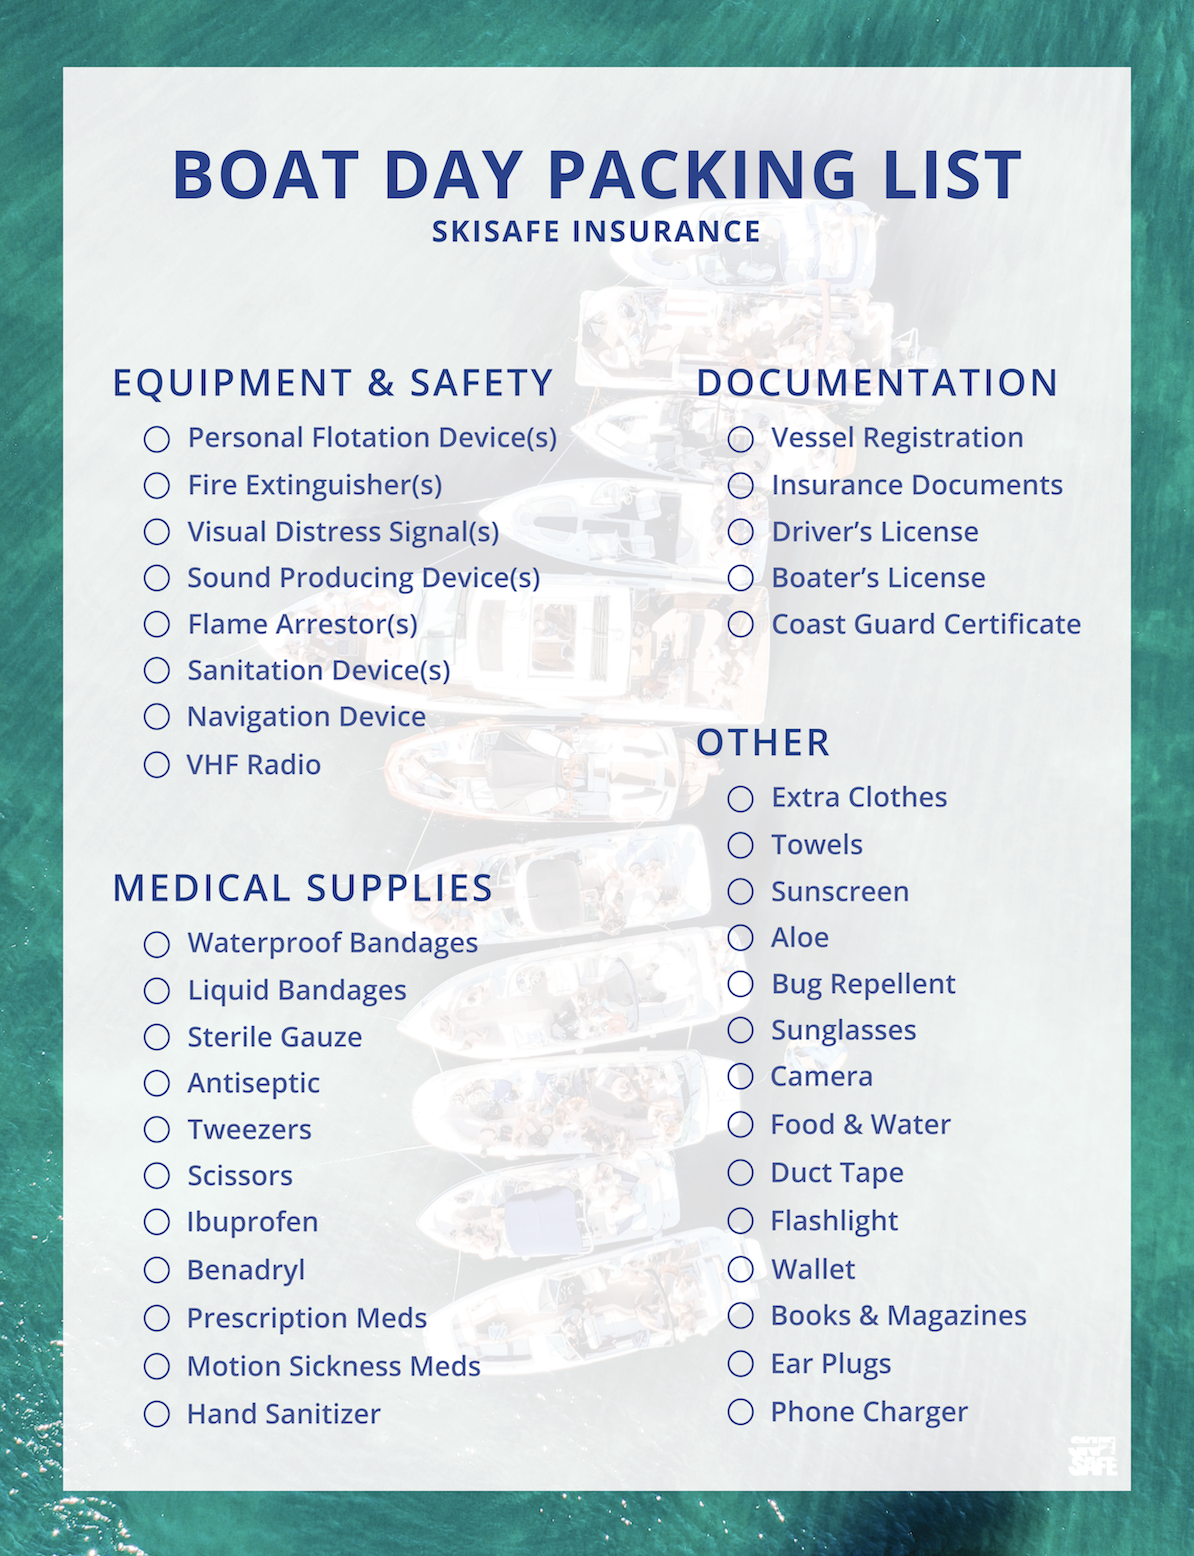 Boat Day Packing List